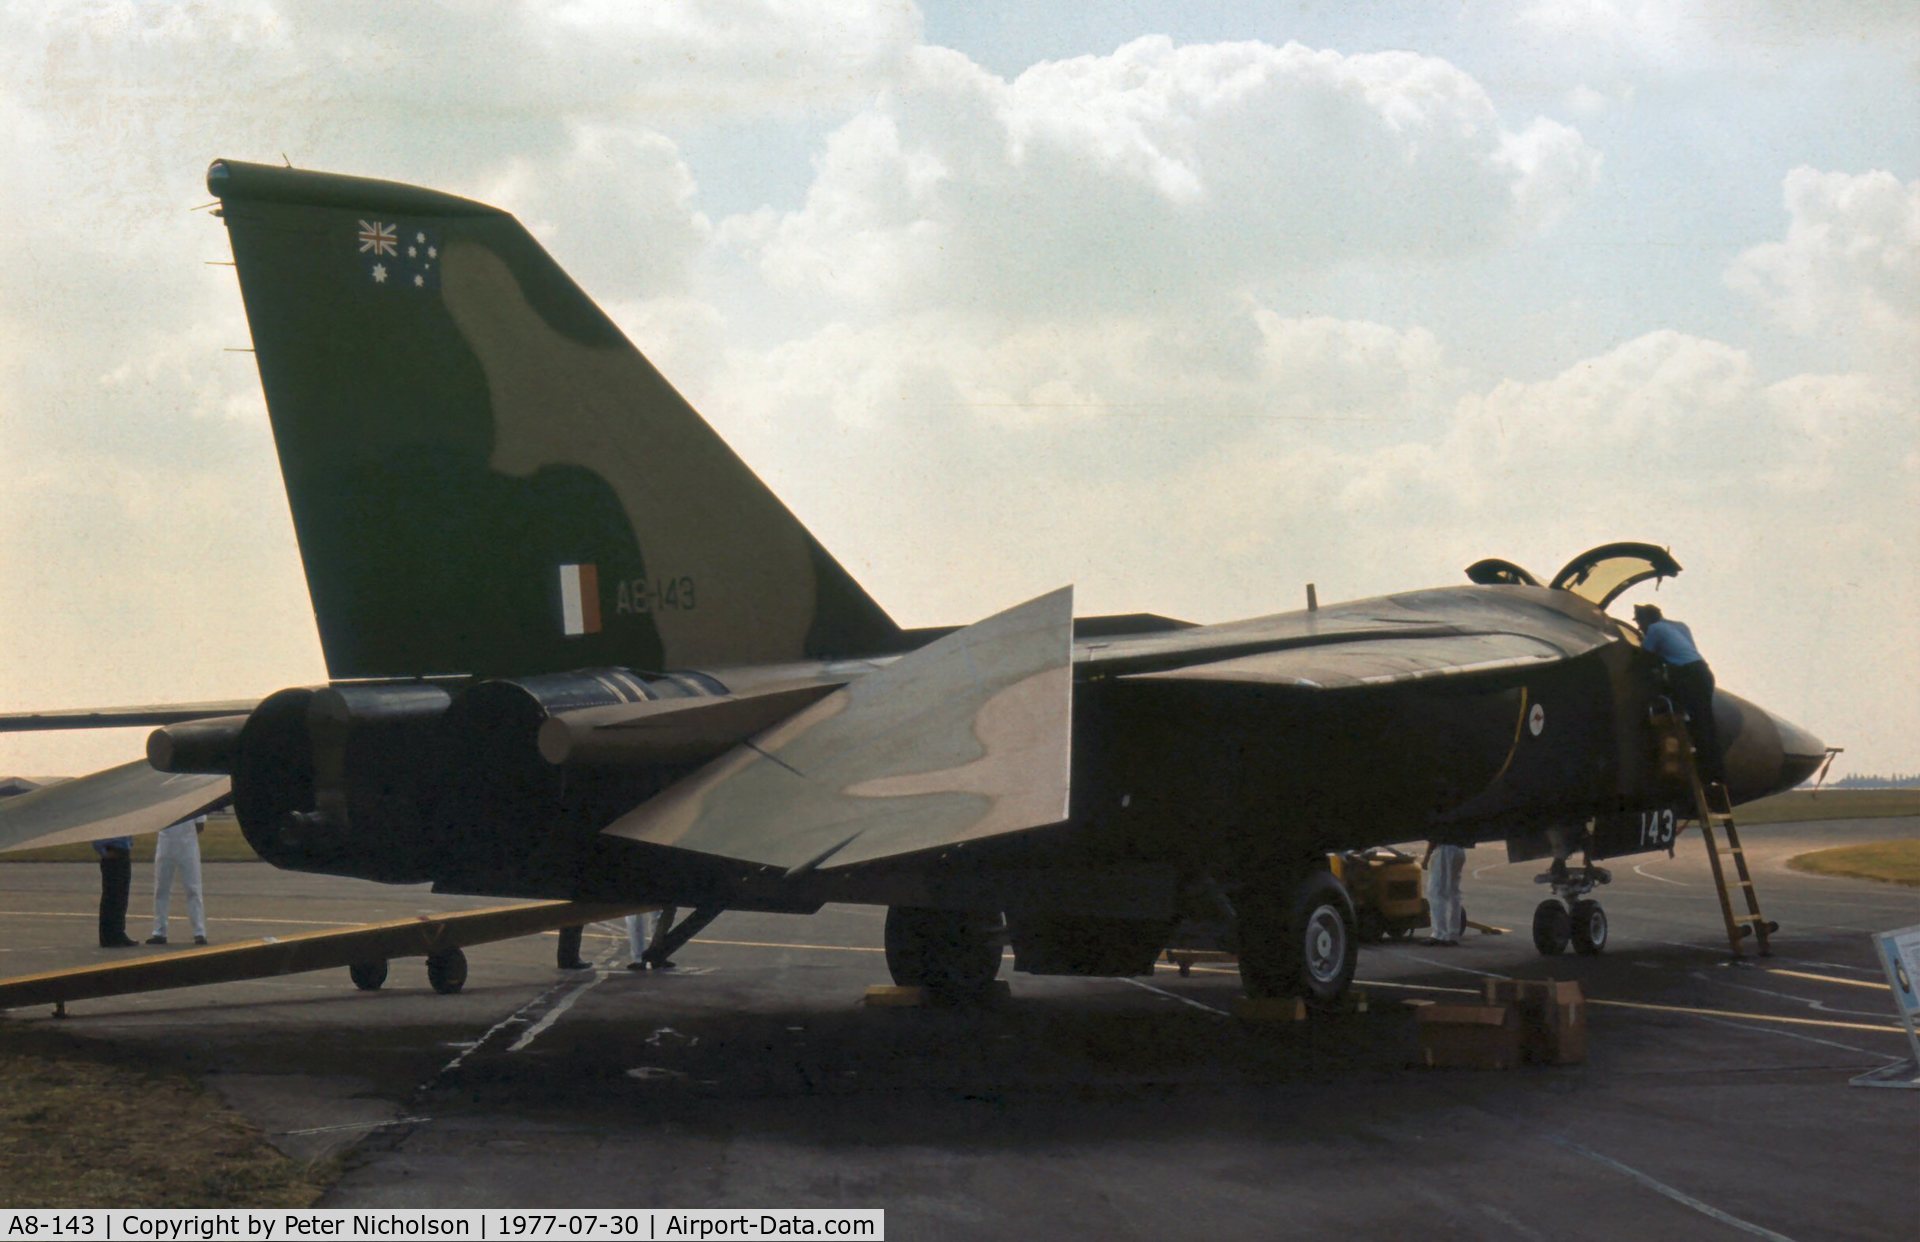 A8-143, 1973 General Dynamics F-111C Aardvark C/N D1-19, F-111C of 6 Squadron Royal Australian Air Force at the 1977 Royal Review at RAF Finningley.